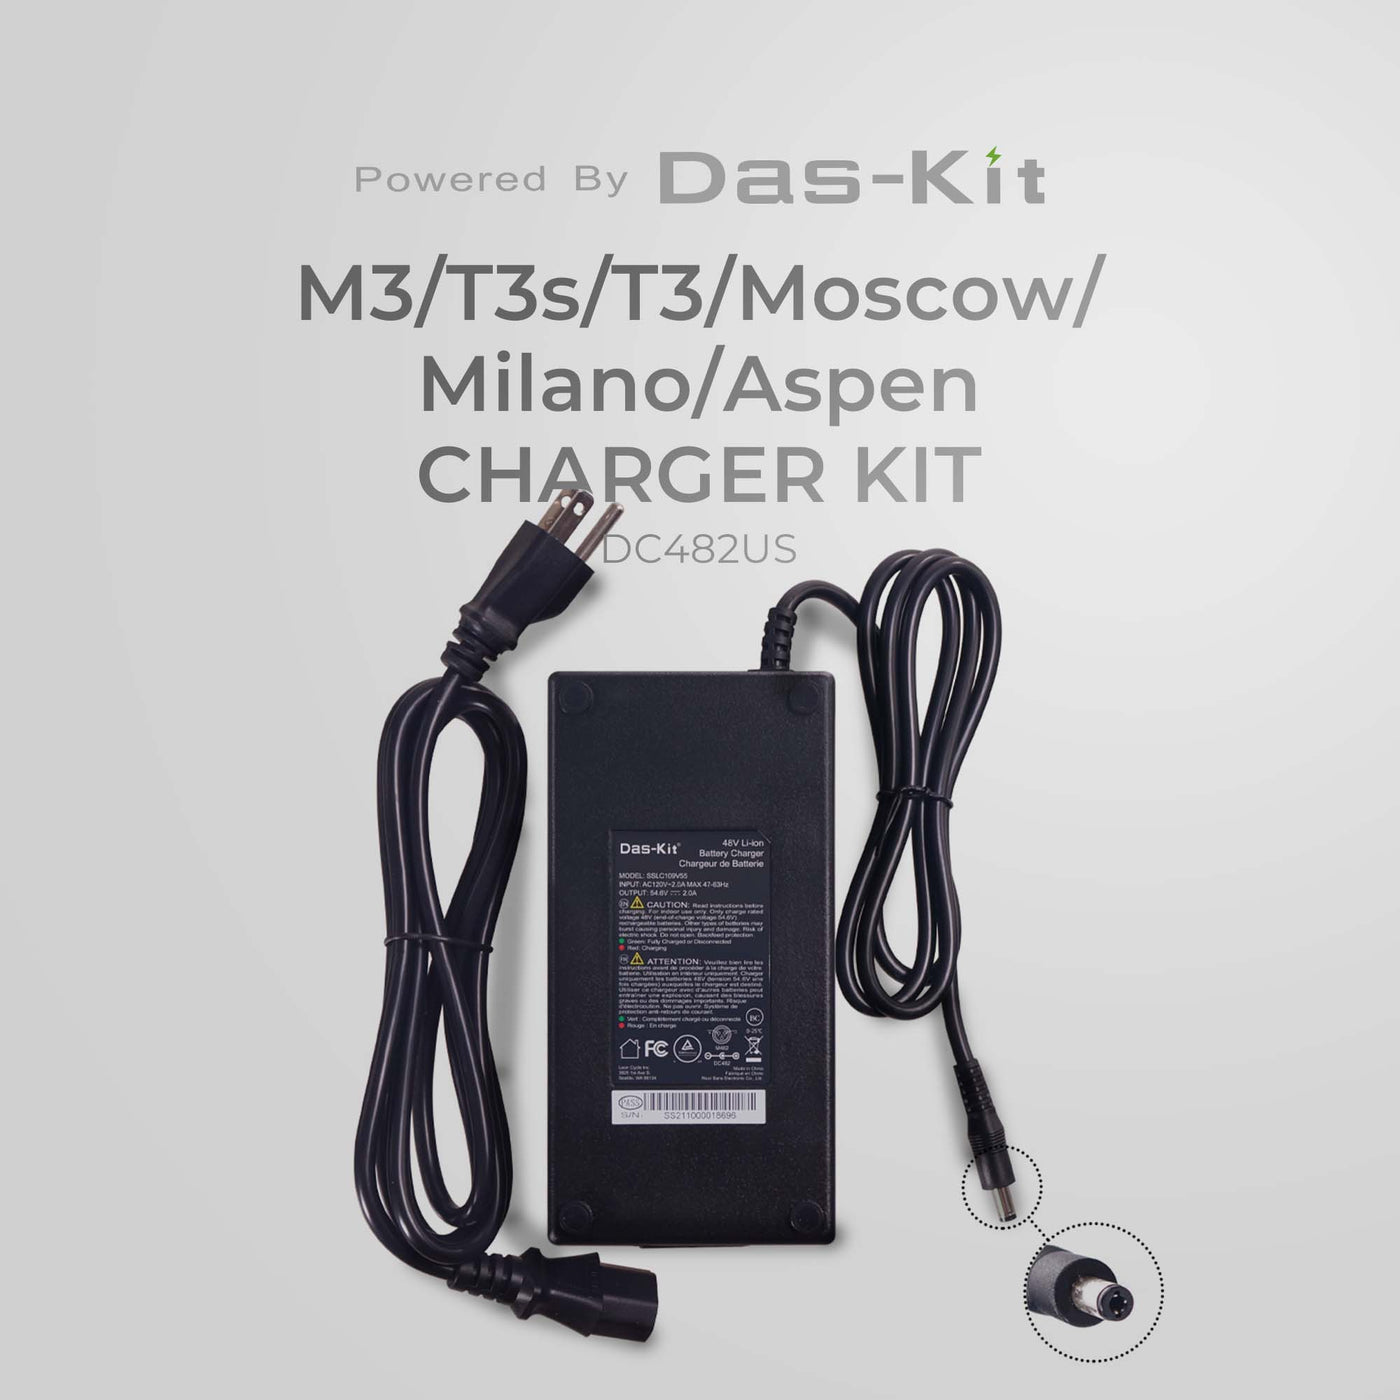 CHARGER KIT DC482US NCM M3/T3S/T3/MOSCOW/MILANO/ASPEN